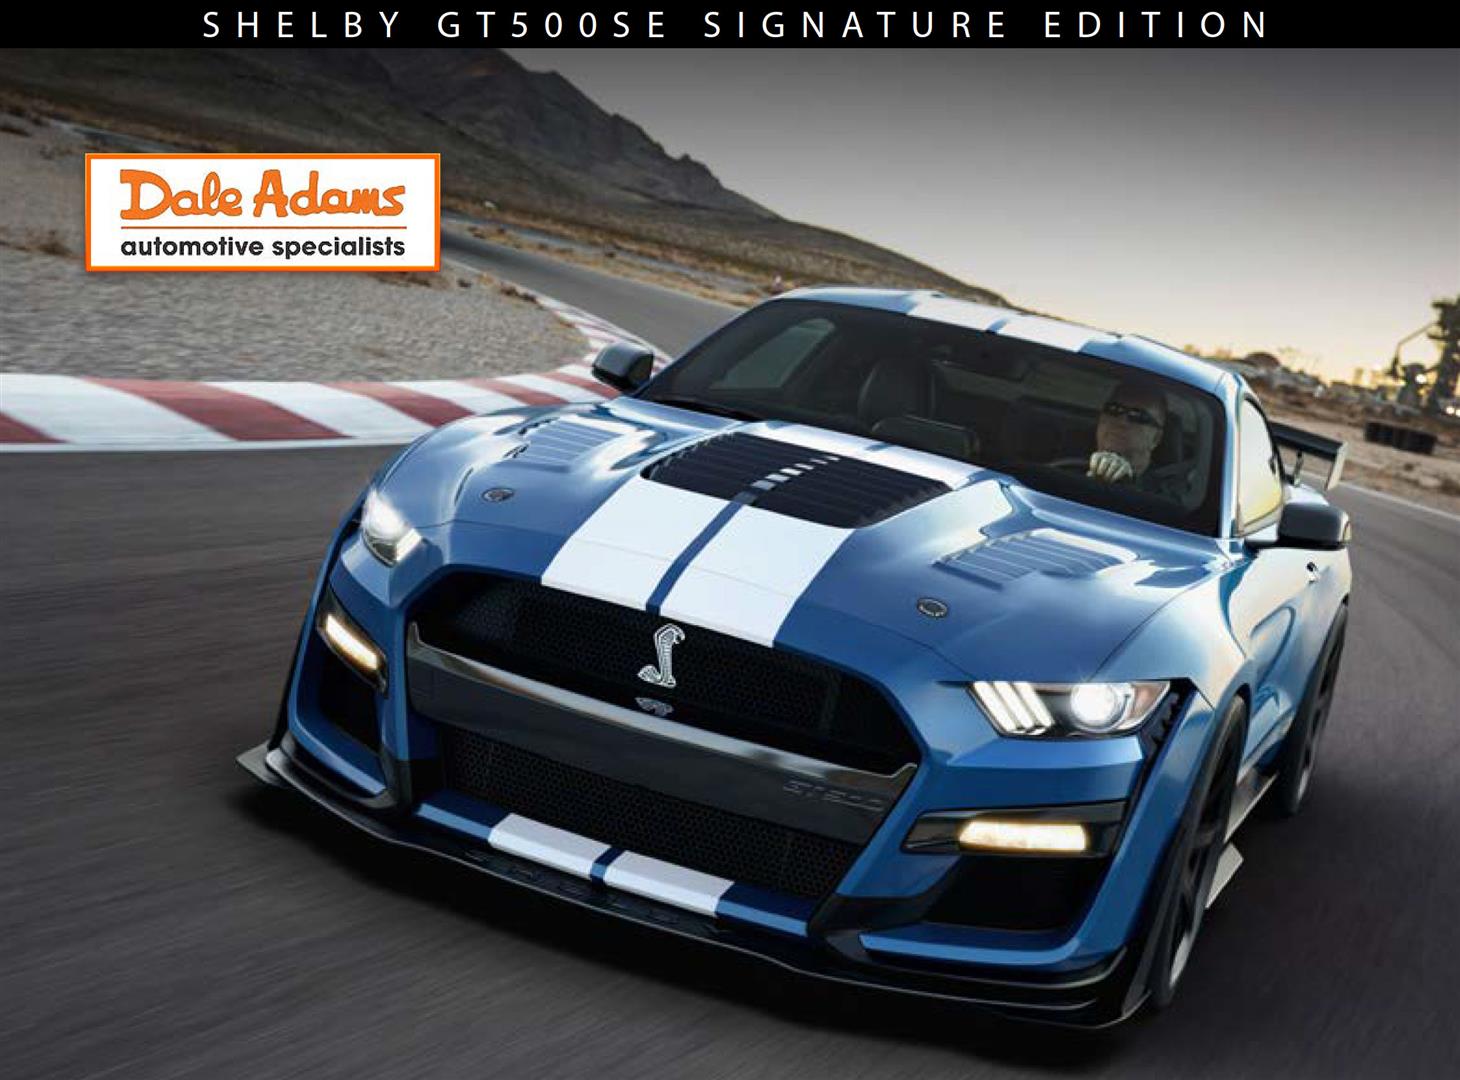 SHELBY GT500 SIGNATURE EDITION